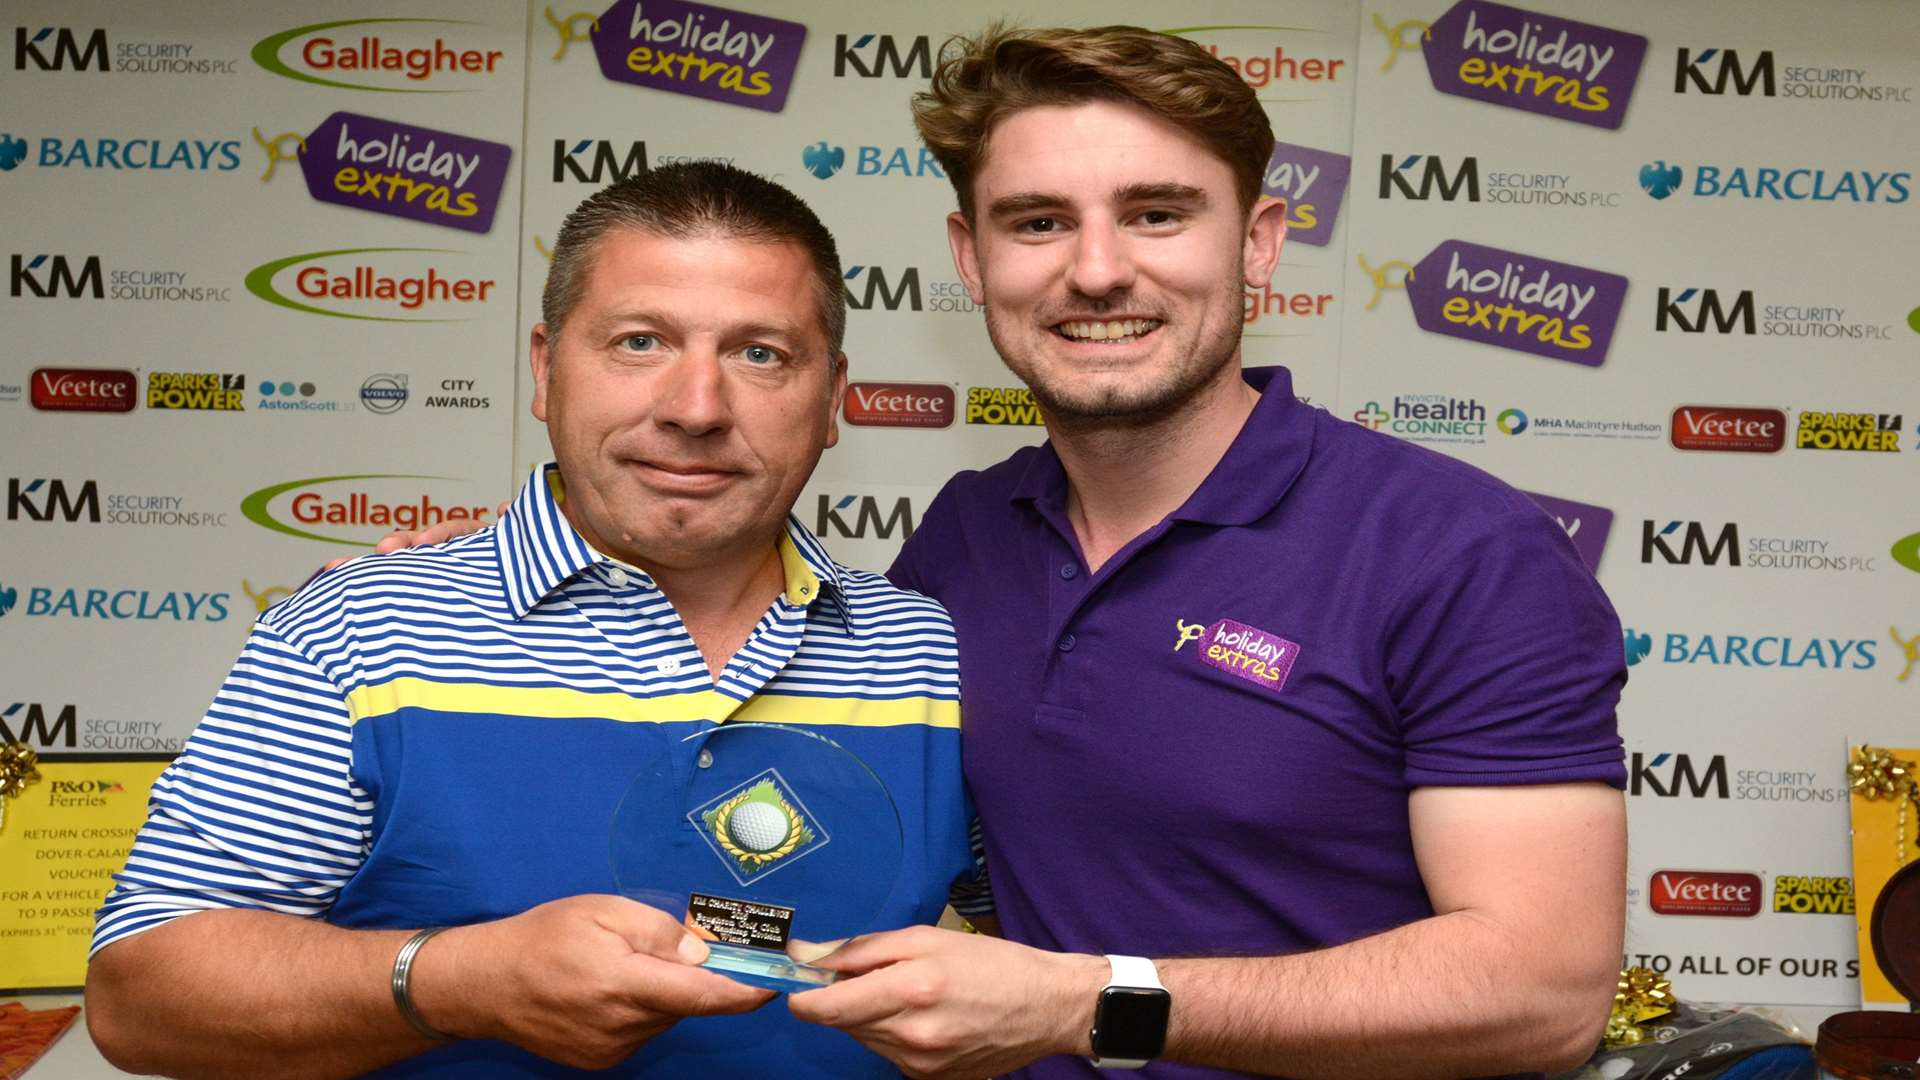 Sean Hagger of Holiday Extras presents Paul Bradley of Tony Kirwan Contractors, Ashford with the 13 - 24 Handicap prize at the KM Charity Golf Challenge 2016 staged at Boughton Golf Club On Friday, May 20.